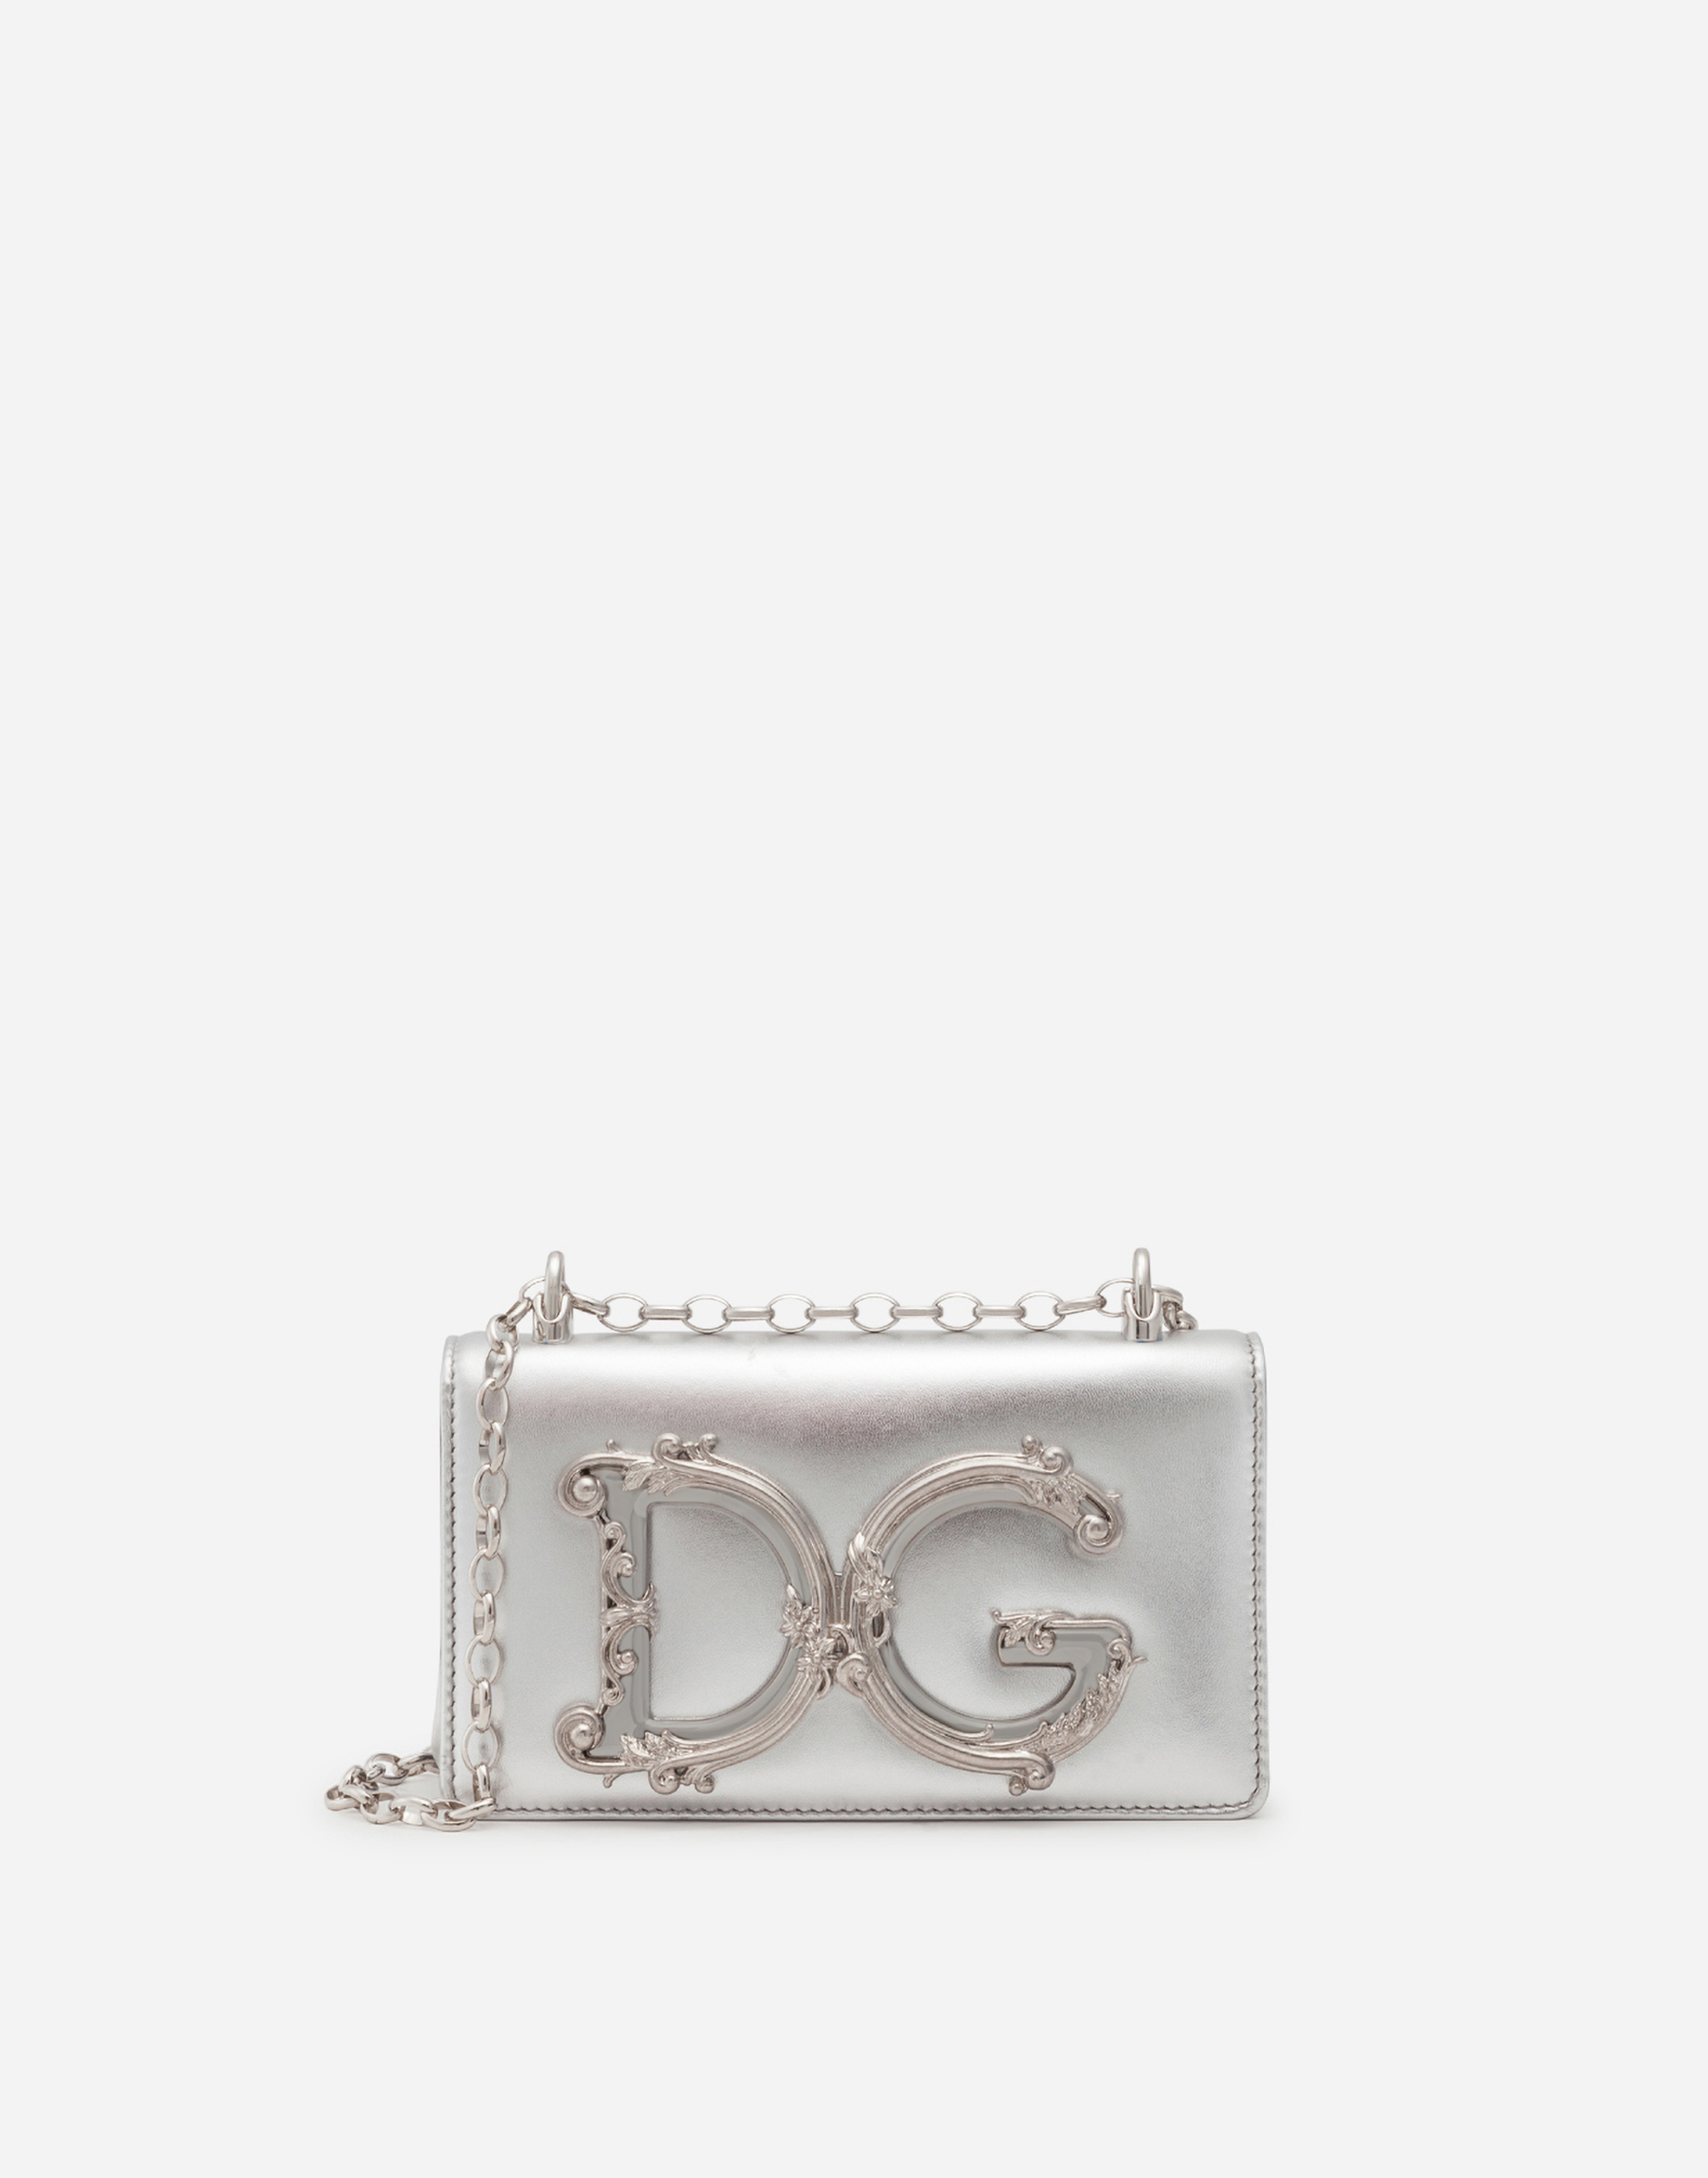 DG Girls phone bag in nappa mordore leather in Silver